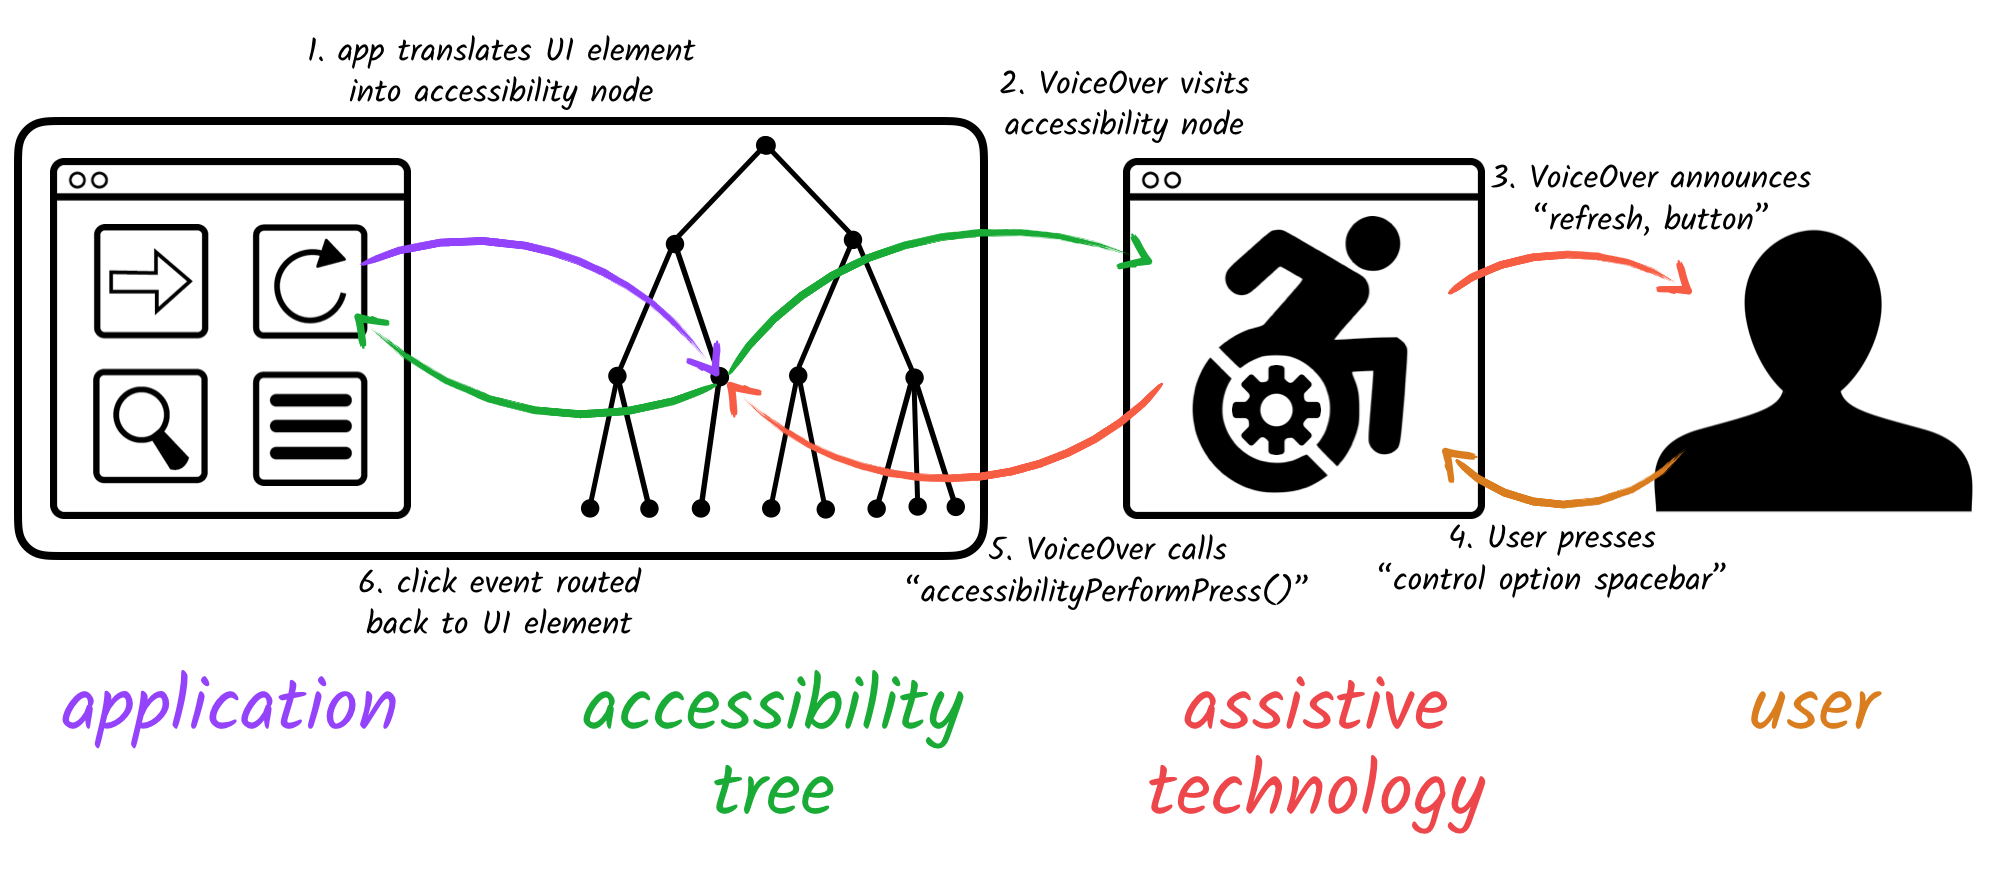 A complete round trip from UI element to accessibility node, then to assistive technology, then to user, then user keypress, and accessibility API action method back to UI element.